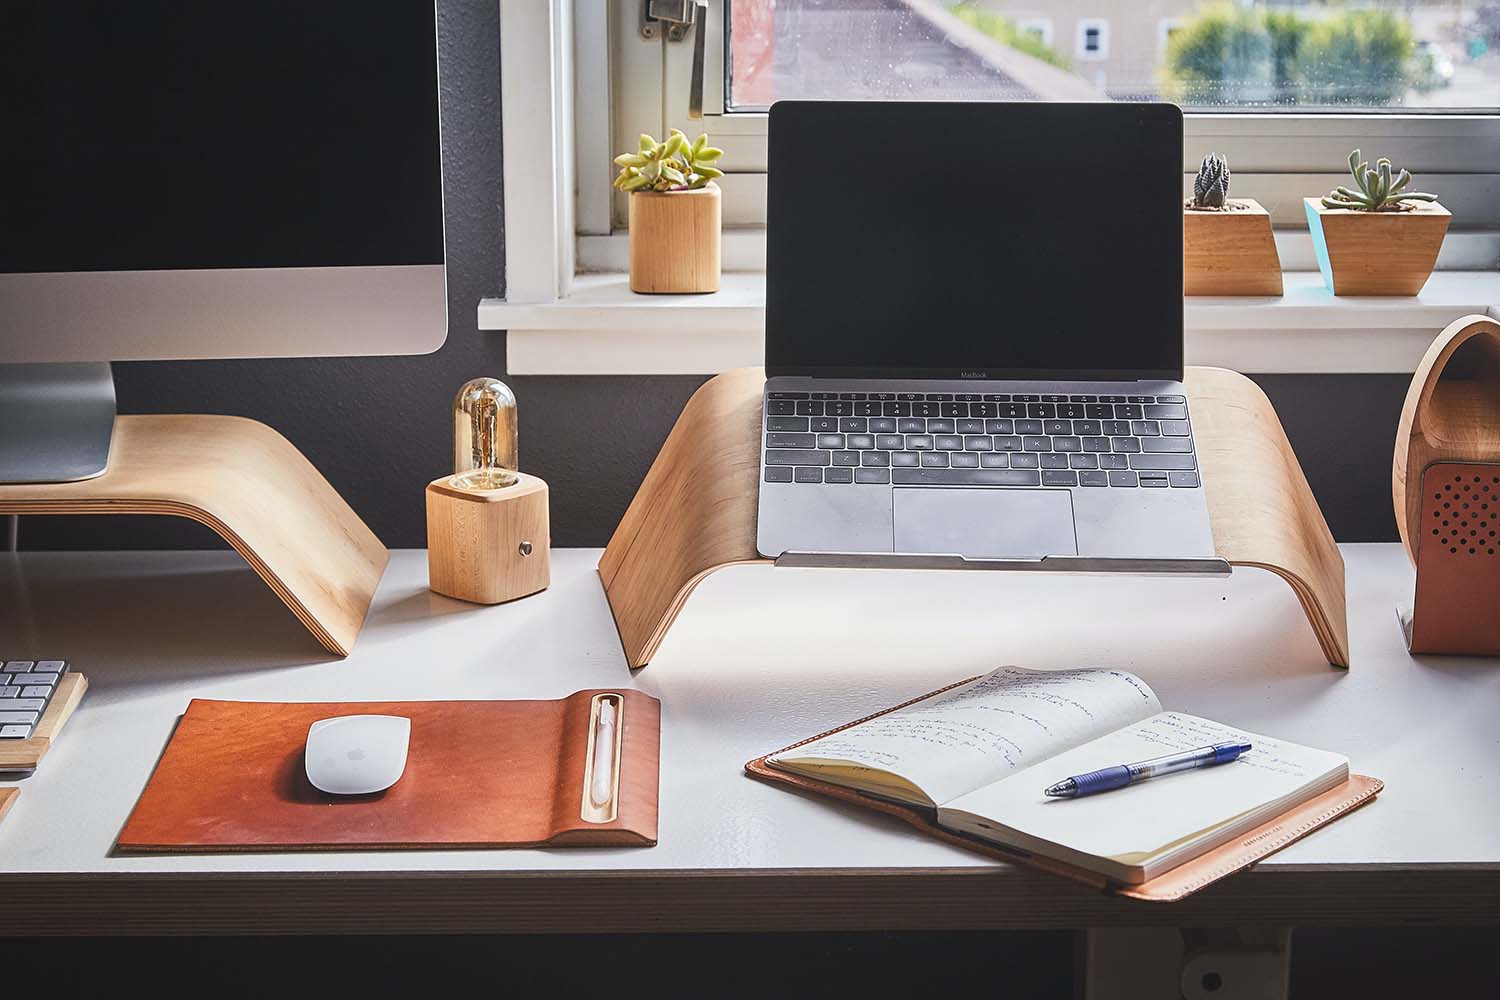 Here’s How to Make Your Home Office Awesome